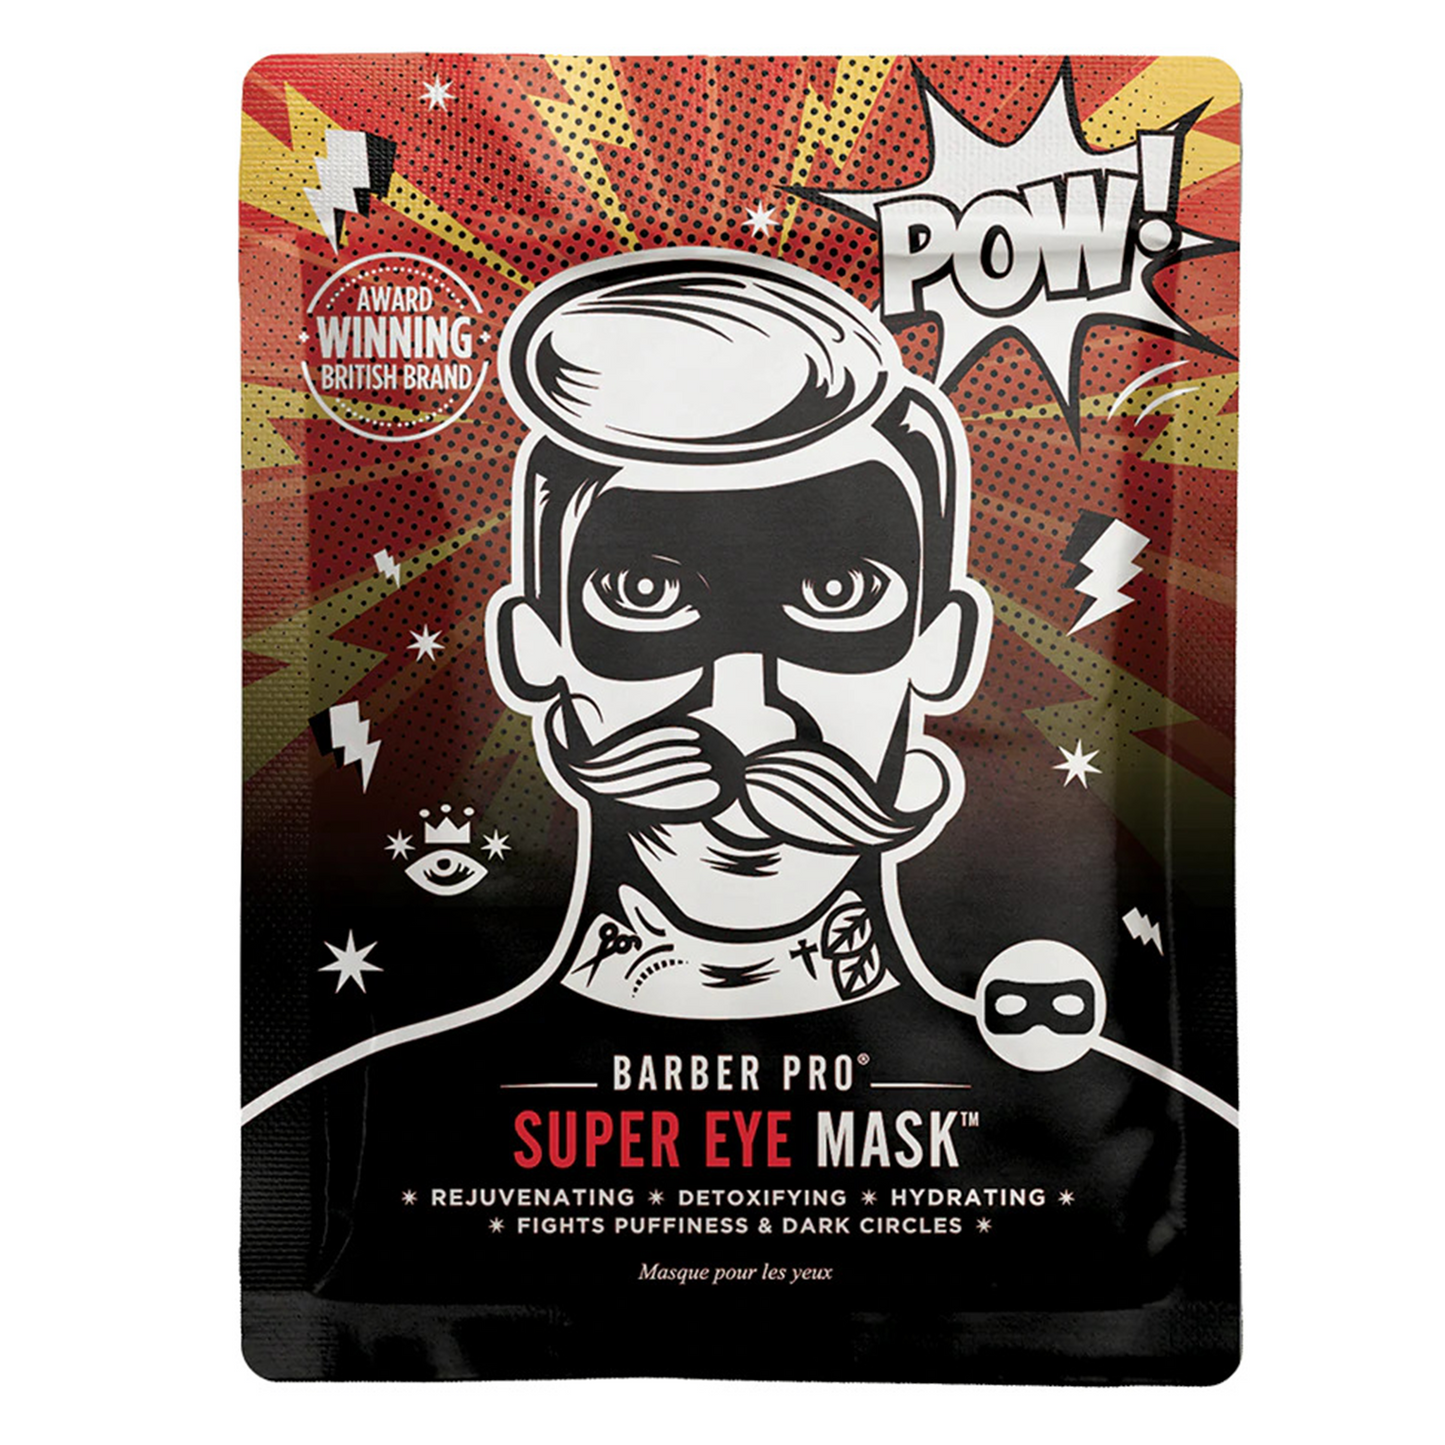 Barber Pro Super Eye Mask: The BARBER PRO Super Eye Mask is your 20 minute fix for puffy or tired looking eyes. This highly rejuvenating mask will hydrate and soothe the area, leaving your skin feeling deeply cooled and revitalized. The BARBER PRO Super Eye Mask will work to detoxify and restore the skin, leaving it feeling moisturized and replenished. This will reduce puffiness and dark circles, helping the eye area to look brighter and feel better!